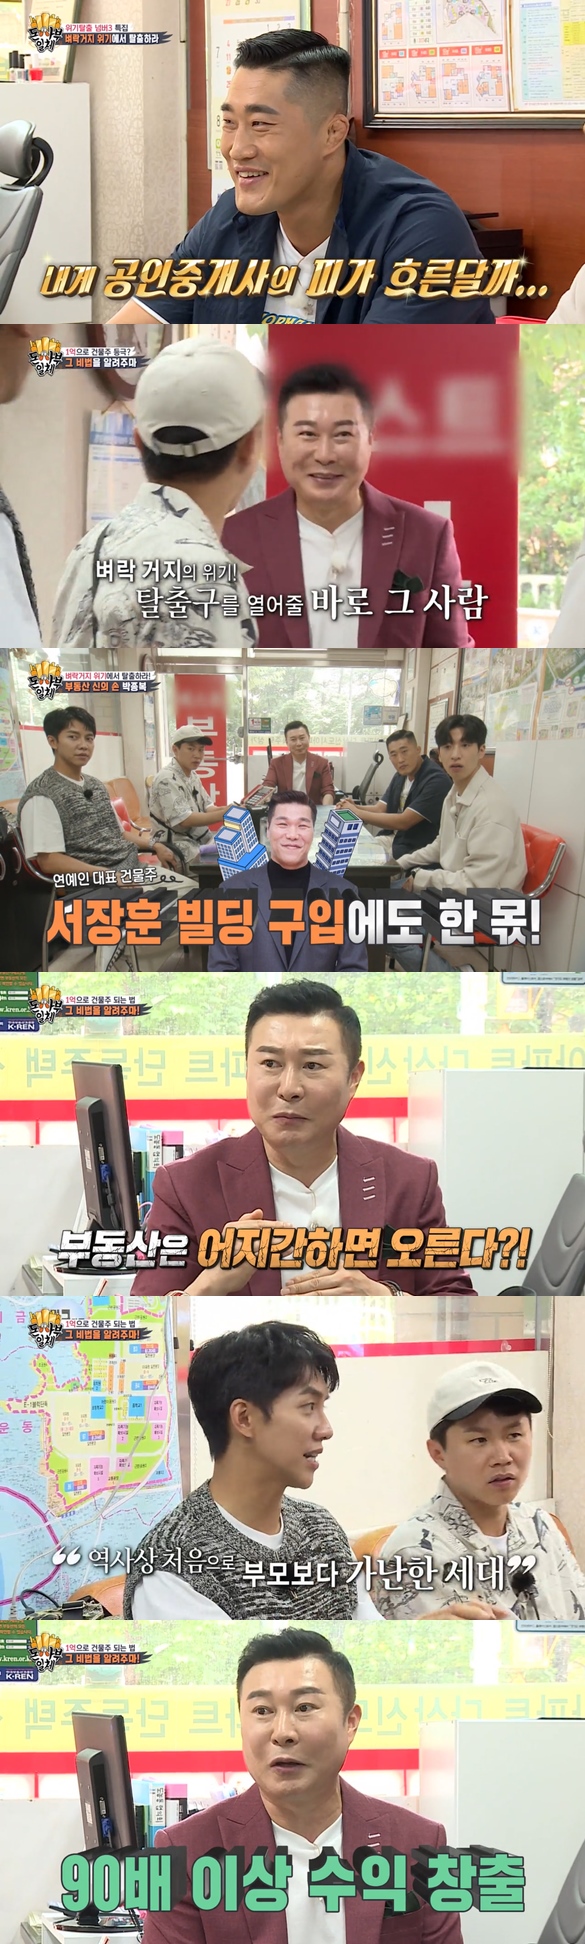 On SBS All The Butlers broadcasted on the 24th, famous real estate consultant park jong-bok appeared and talked.Lee Seung-gi said, Real Estate opening is the first time, and Yang Se-hyeong said, Real Estate is coming.When I was looking for a new house, I went around Real Estate and said, Please stay for sale.Kim Dong-Hyun said: Im the one who also took the CPA exam, its really hard, my father and sister have a CPA license. (I) didnt pass. I need to know a lot about the law.Its almost like a judicial notice, he added, laughing.Asked if it would be 100 million right away, Yoo Soo-bin referred to the full-set home; Kim Dong-Hyun said: We have to put it (in stock) quickly.Then, Real Estate professional consultant park jong-bok appeared as master.Park jong-bok is a 40 billion asset owner with 25 years of real estate experience and 6 Gangnam buildings.Park jong-bok said, So far, you can see that you have been called about 6 trillion won in customers assets.I have acquired a real estate and have it in the long term, and there are some people who have sold it because the price has risen. Lee Seung-gi asked, How much did your master earn? And Park jong-bok surprised everyone by saying, Home, land and more than 40 billion.Park jong-bok, famous for making Seo Jang-hoon a rich building, added, Seo Jang-hoon, Lee Seung-chul, Lee Si-young, Lee Jong-seok and So Ji-sub have taken my hand.On the subject of dreaming of Landlord with 100 million, park jong-bok said: Its enough; 100 million or so might be 100 million.It can be Landlord enough in the metropolitan area and it is profitable. I think the house prices are so high that theres nothing we can do, Lee Seung-gi said.Yang Se-hyeong added, Even if you make a mall bread, you can not buy a real estate, so it seems to go to Coin and stocks.Its called just the right thing at this time: it could lose money; investment is always an adventure, said Kim Dong-Hyun, a stock hot-blooded ant.I dont think we need to hear any more. Its really frustrating. Its self-conscious and broken. Its too dangerous, Park jong-bok said.Park jong-bok said, I am a very bad person for me. I can say that because I am an expert, there is a risk that stocks can be lost.Real Estate is bound to rise if it goes away: 6 to 70 percent of parents assets are Real Estate, the report said.Lee Seung-gi, who listened to this, said, But my parents and my generation are different from my generation. For the first time, my children are poorer than their parents.In the old days, I invested in bricks, but now the start itself is too high. Park jong-bok said, What Seung-gi said is just on the Internet. Do you talk about this for so long?Kim Dong-Hyun said, I sympathized with the end of the victory, and if young people can collect money and buy a house like a hurdle, I will collect it.Park jong-bok said, I met me and it would change. One example was a young man in his 20s who worked in ballet parking.I do not think it is an asset now. I have become an asset who has earned more than 90 times. Photo: SBS broadcast screen